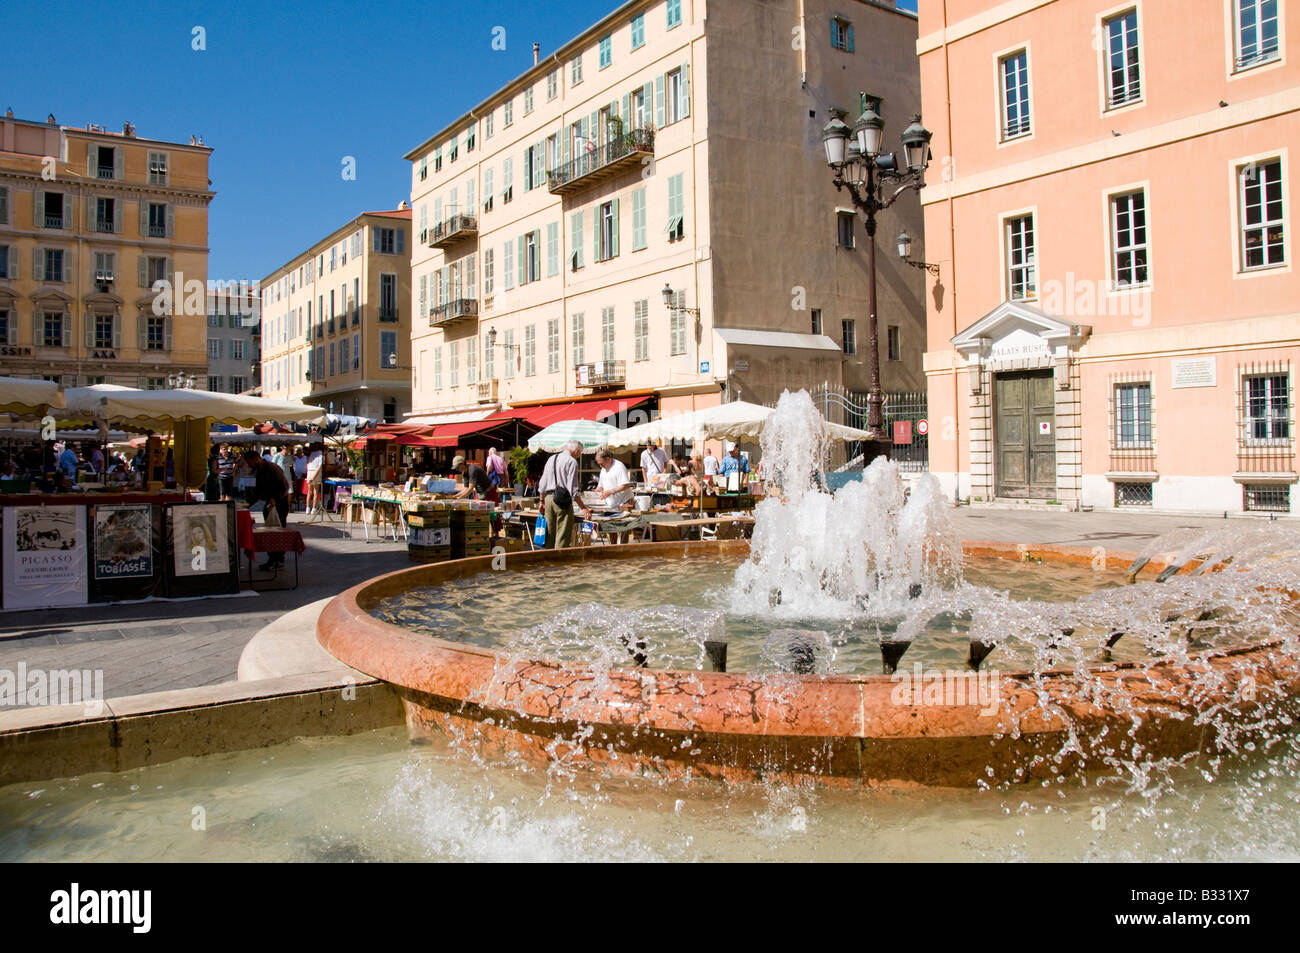 The book market in Place du Palais, Old Town of Nice, Cote d'Azur, France Stock Photo